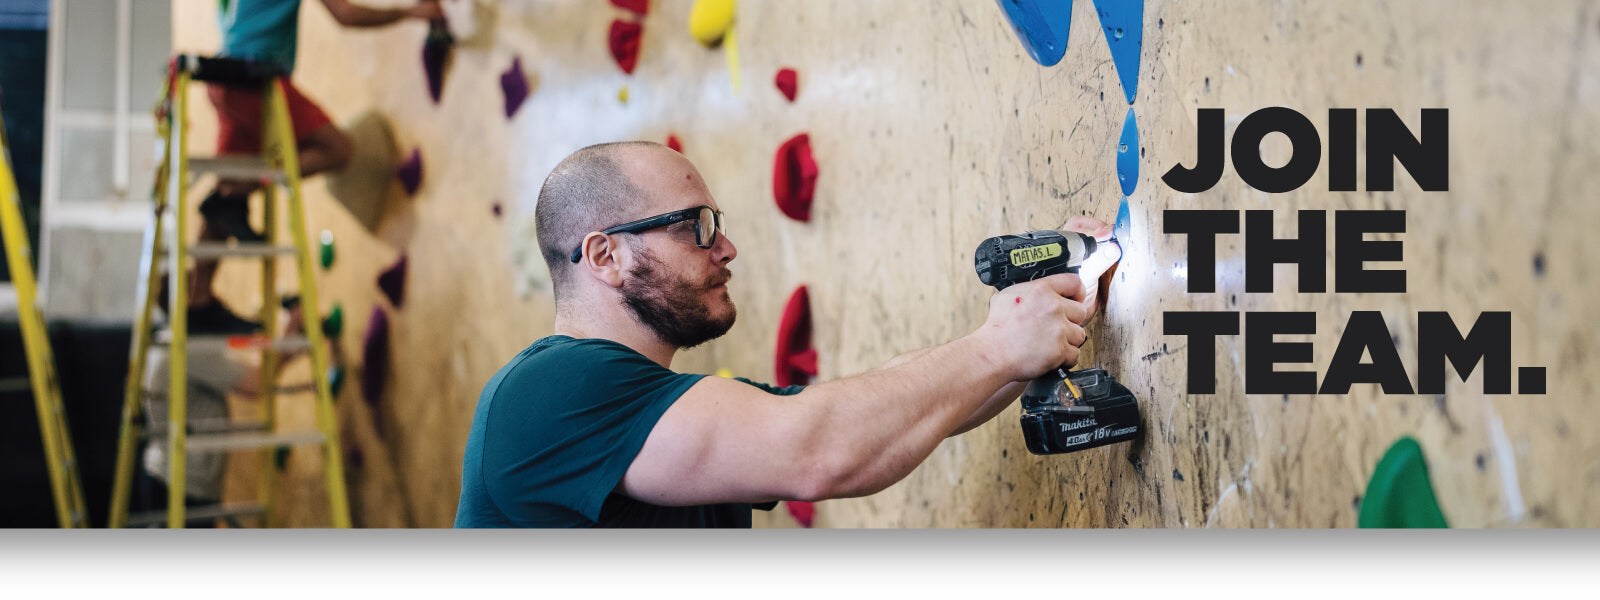 Join the team. - Man drilling fixture into indoor rock climbing wall